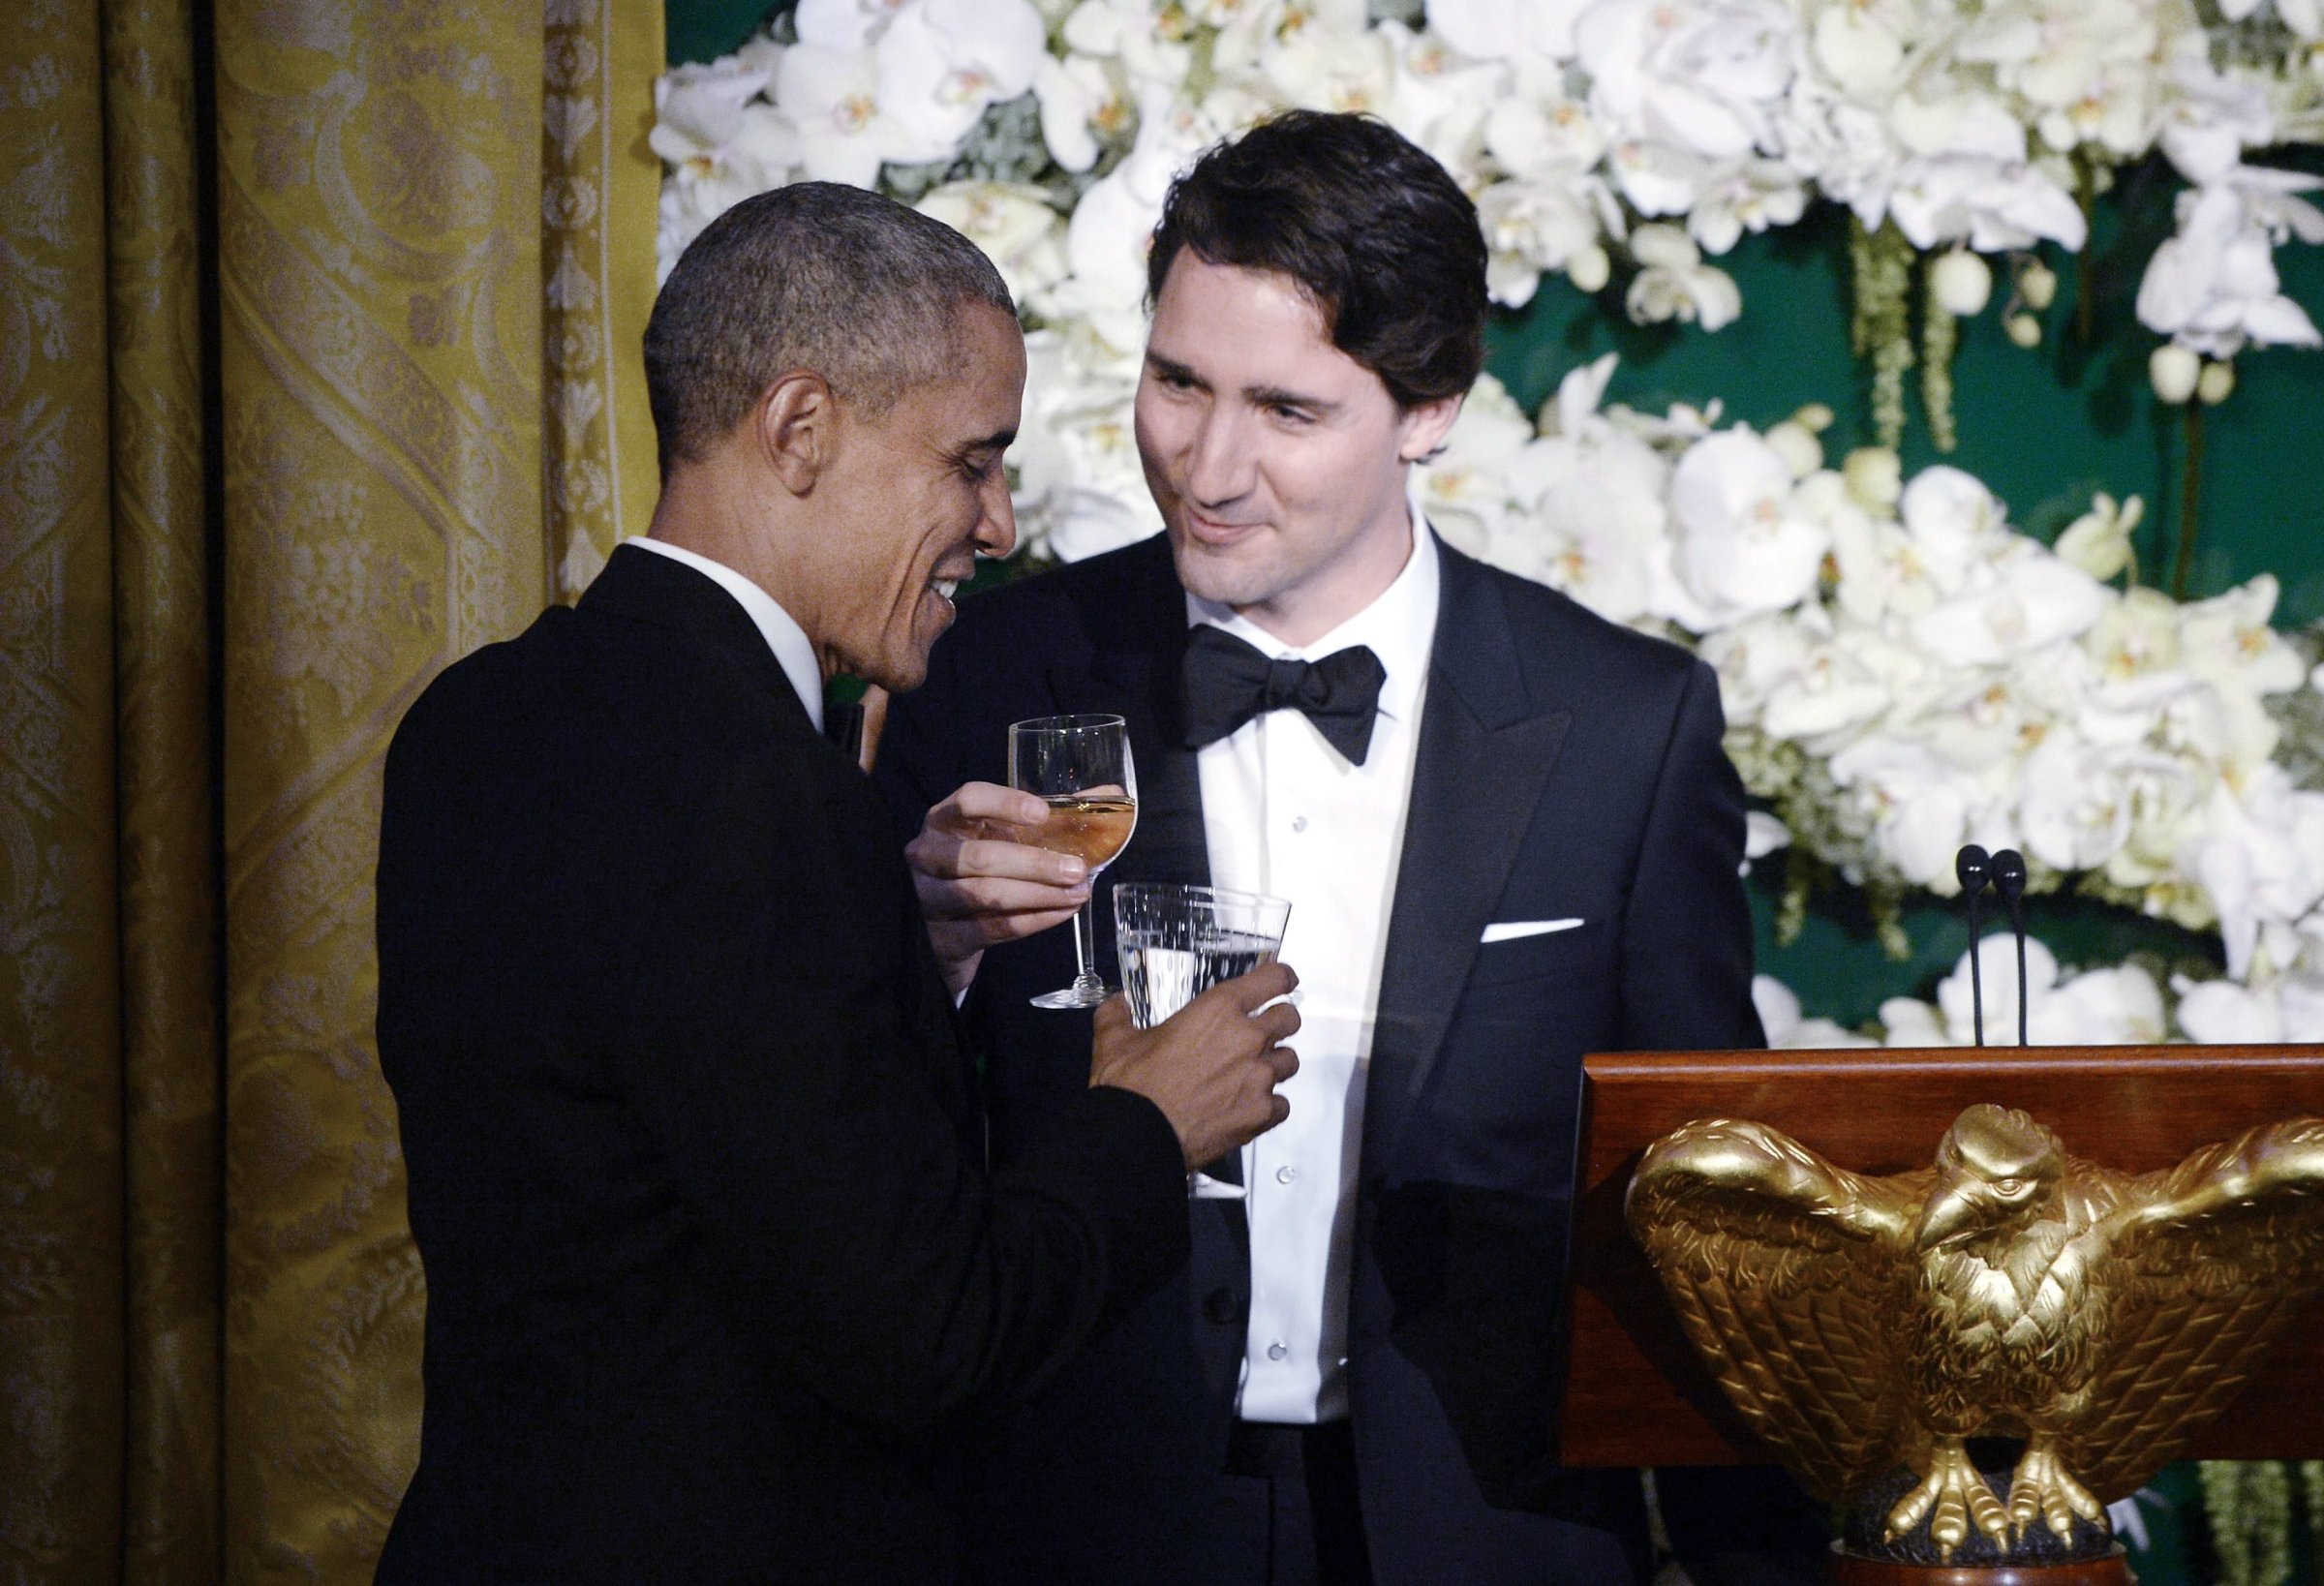 Canadian Prime Minister Justin Trudeau visits the USA - White House State Dinner Reception